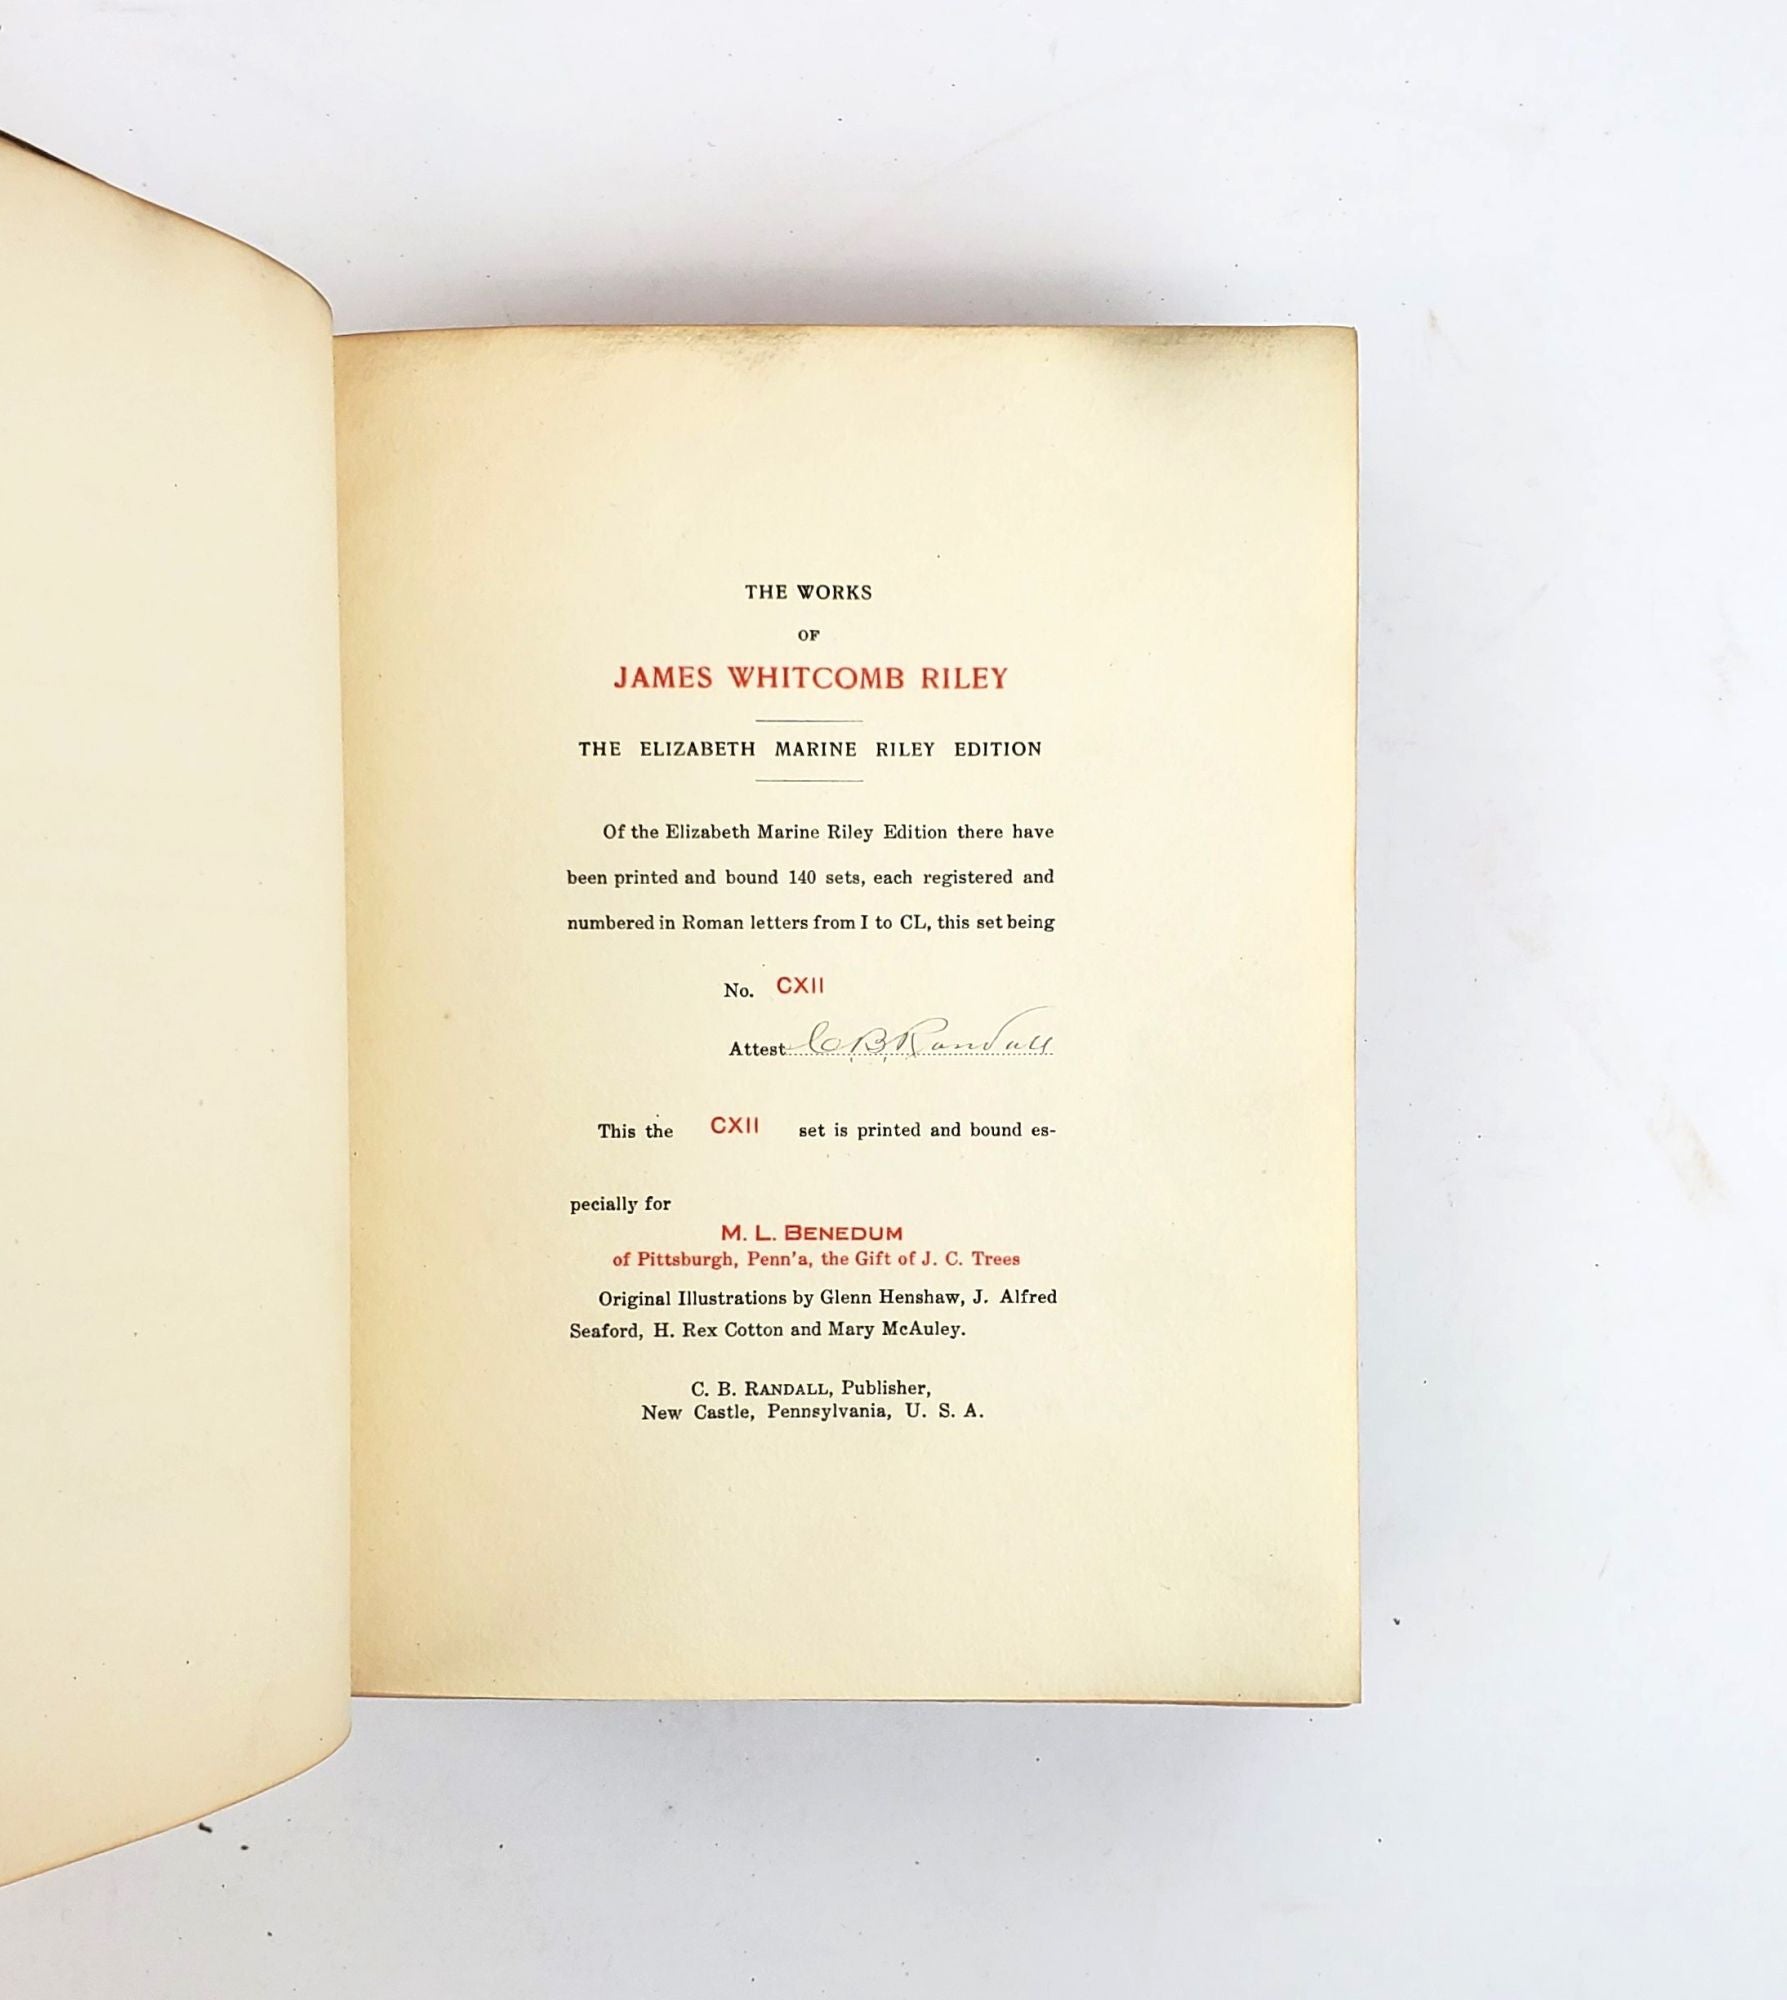 Product Image for THE COMPLETE WORKS OF JAMES WHITCOMB RILEY : IN WHICH THE POEMS, INCLUDING A NUMBER HERETOFORE UNPUBLISHED, ARE ARRANGED IN THE ORDER IN WHICH THEY WERE WRITTEN : TOGETHER WITH PHOTOGRAPHS, BIBLIOGRAPHIC NOTES, AND A LIFE SKETCH OF THE AUTHOR [Six volumes